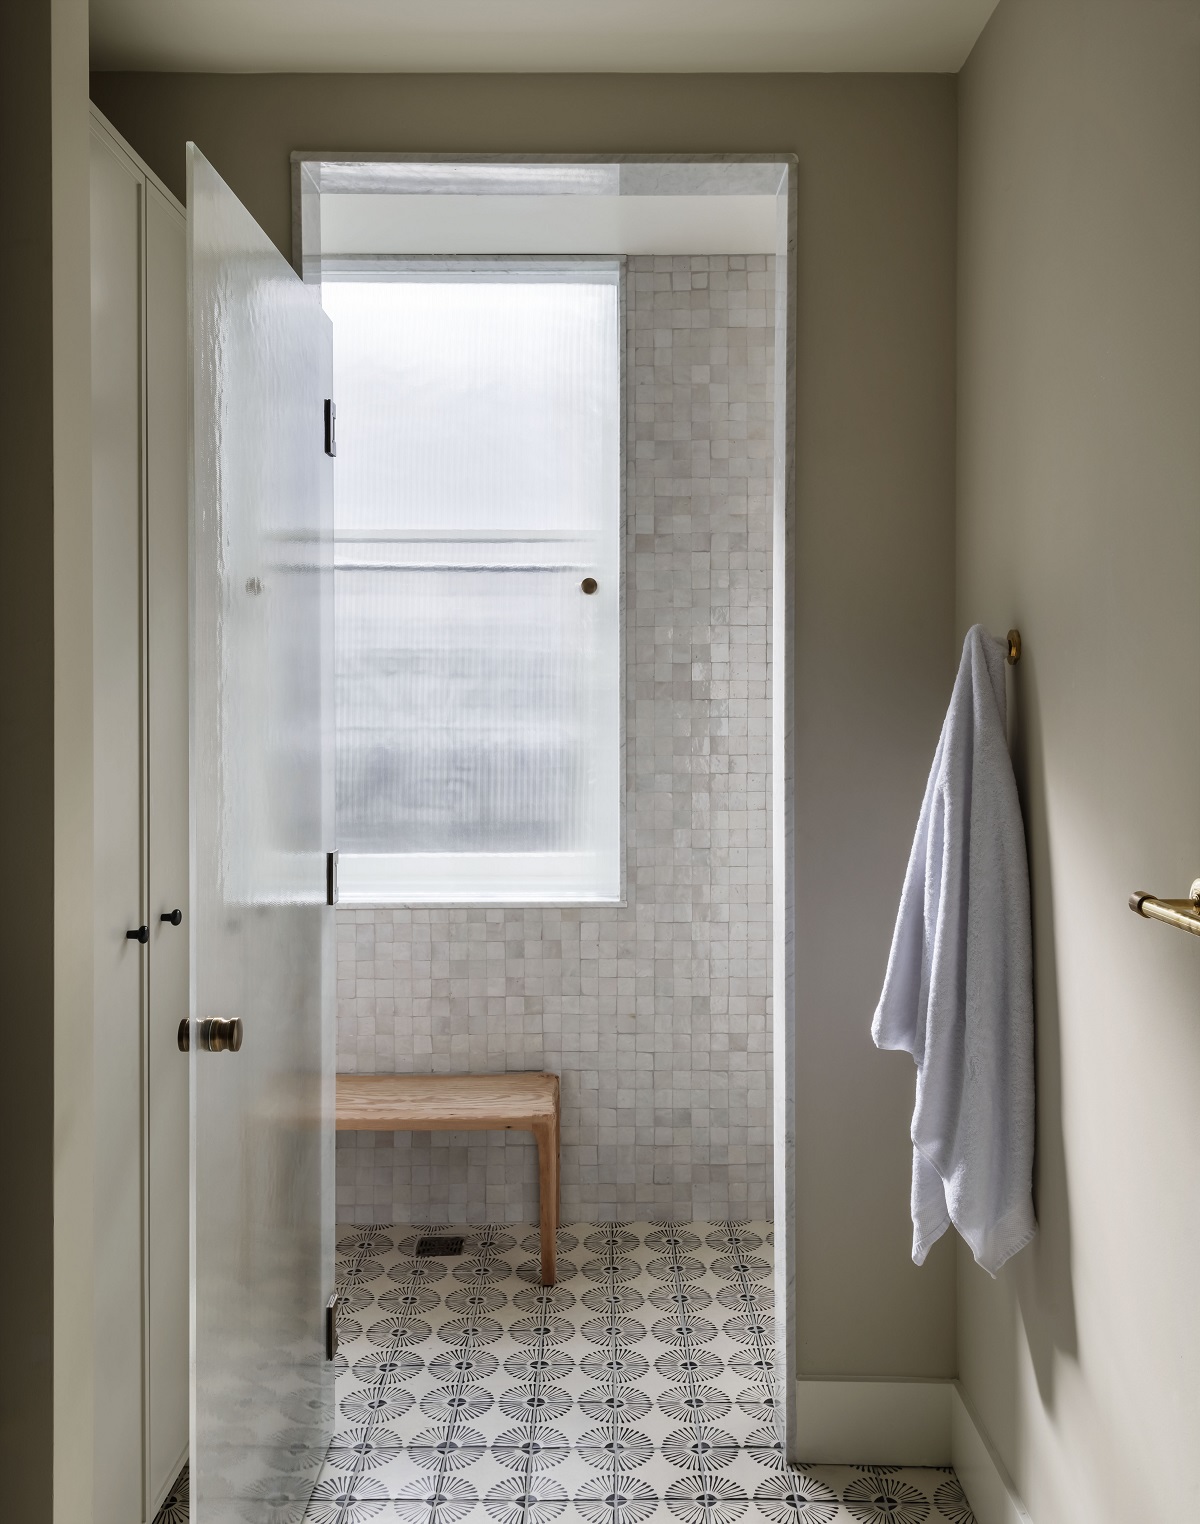 Bathroom in The Pinch with patterned floor tiles and grey zellige on the walls